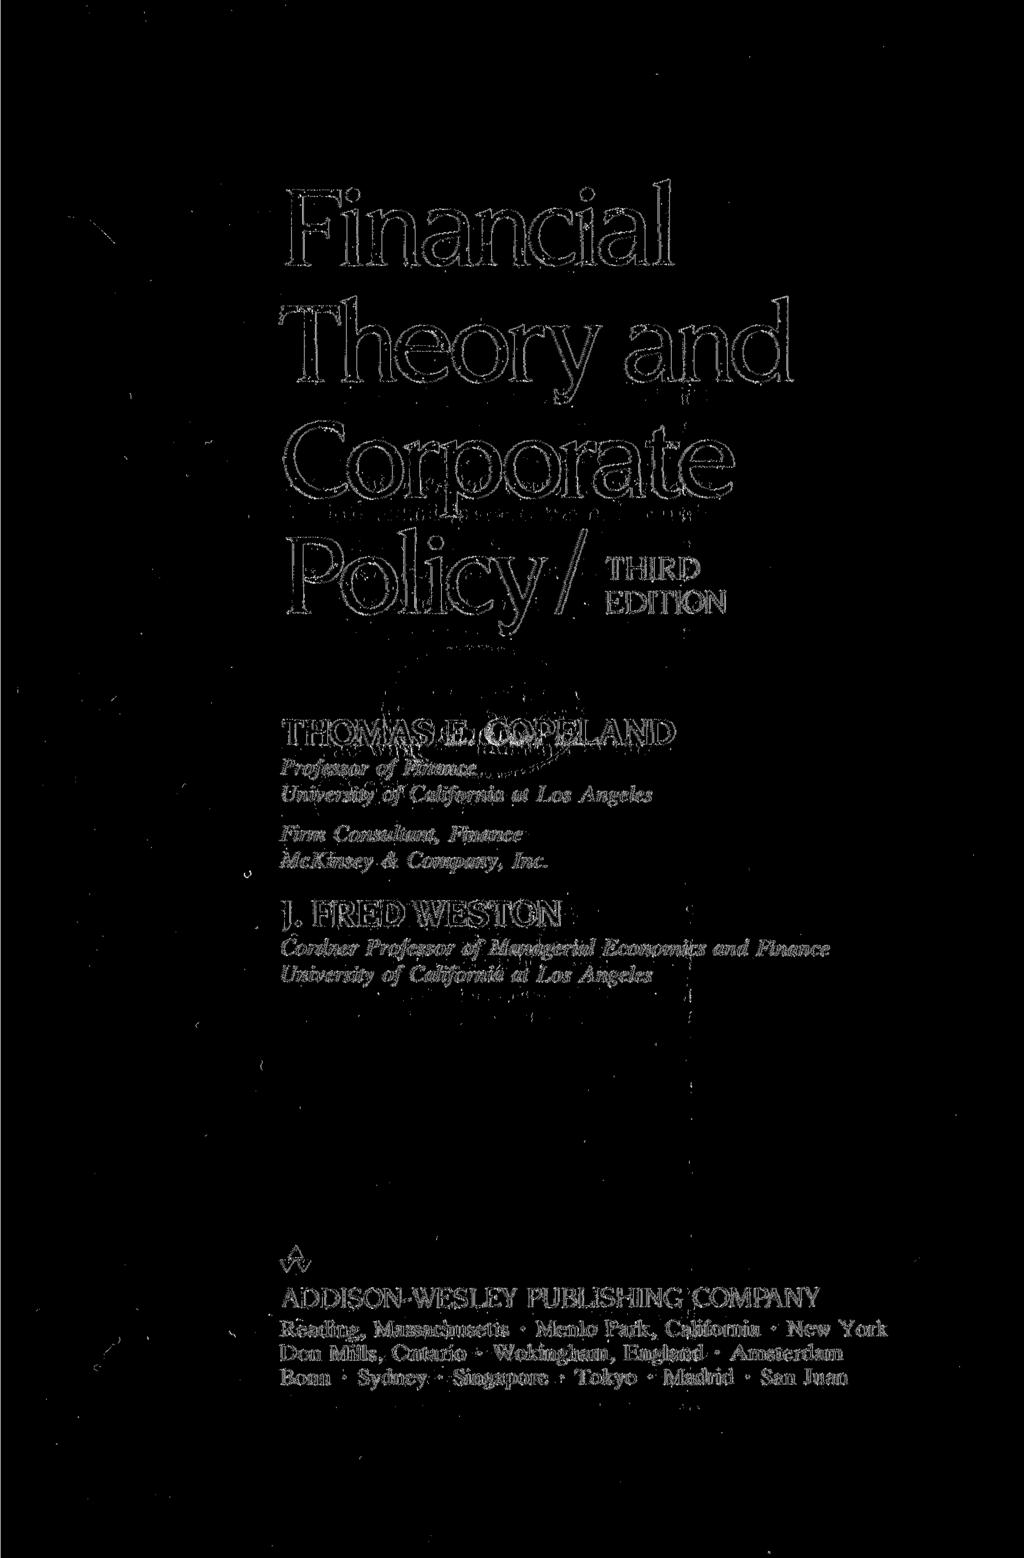 Financial Theory and Corporate Policy/ THIRD EDITION THOMAS E COPELAND Professor of Finance University of California at Los Angeles Firm Consultant, Finance McKinsey & Company, Inc. J.